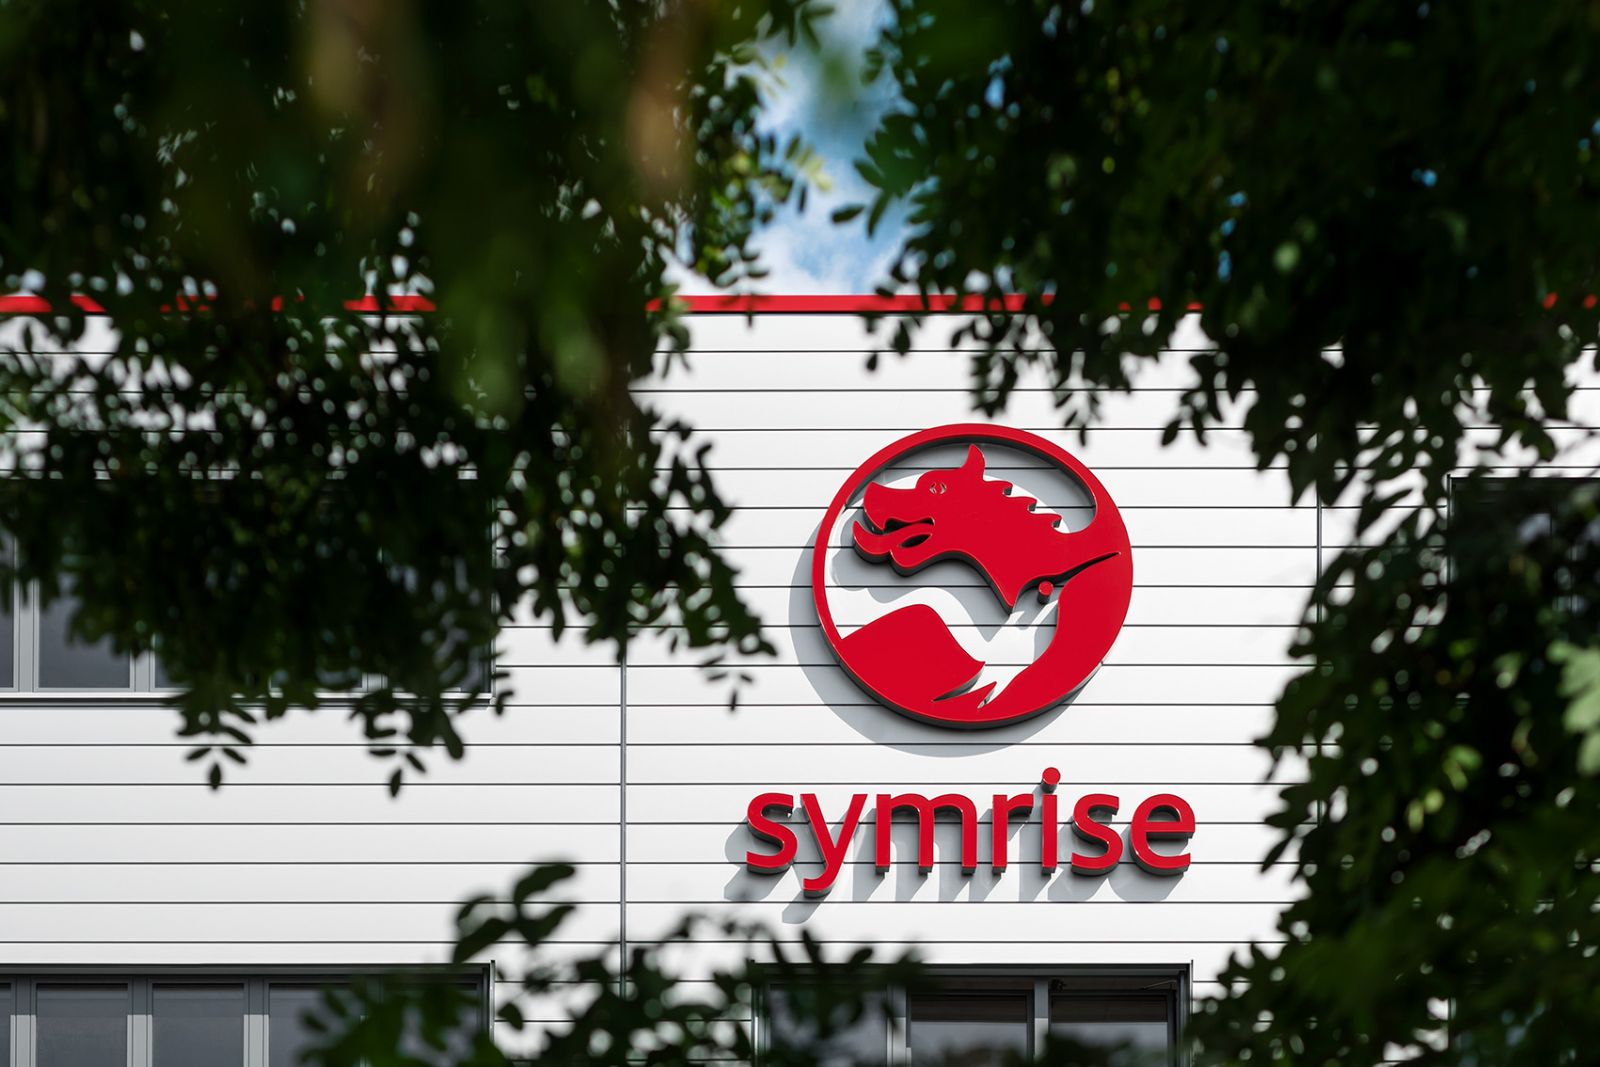 The Symrise Group also operates a cosmetics manufacturing facility in Goose Creek. (Photo/Provided)